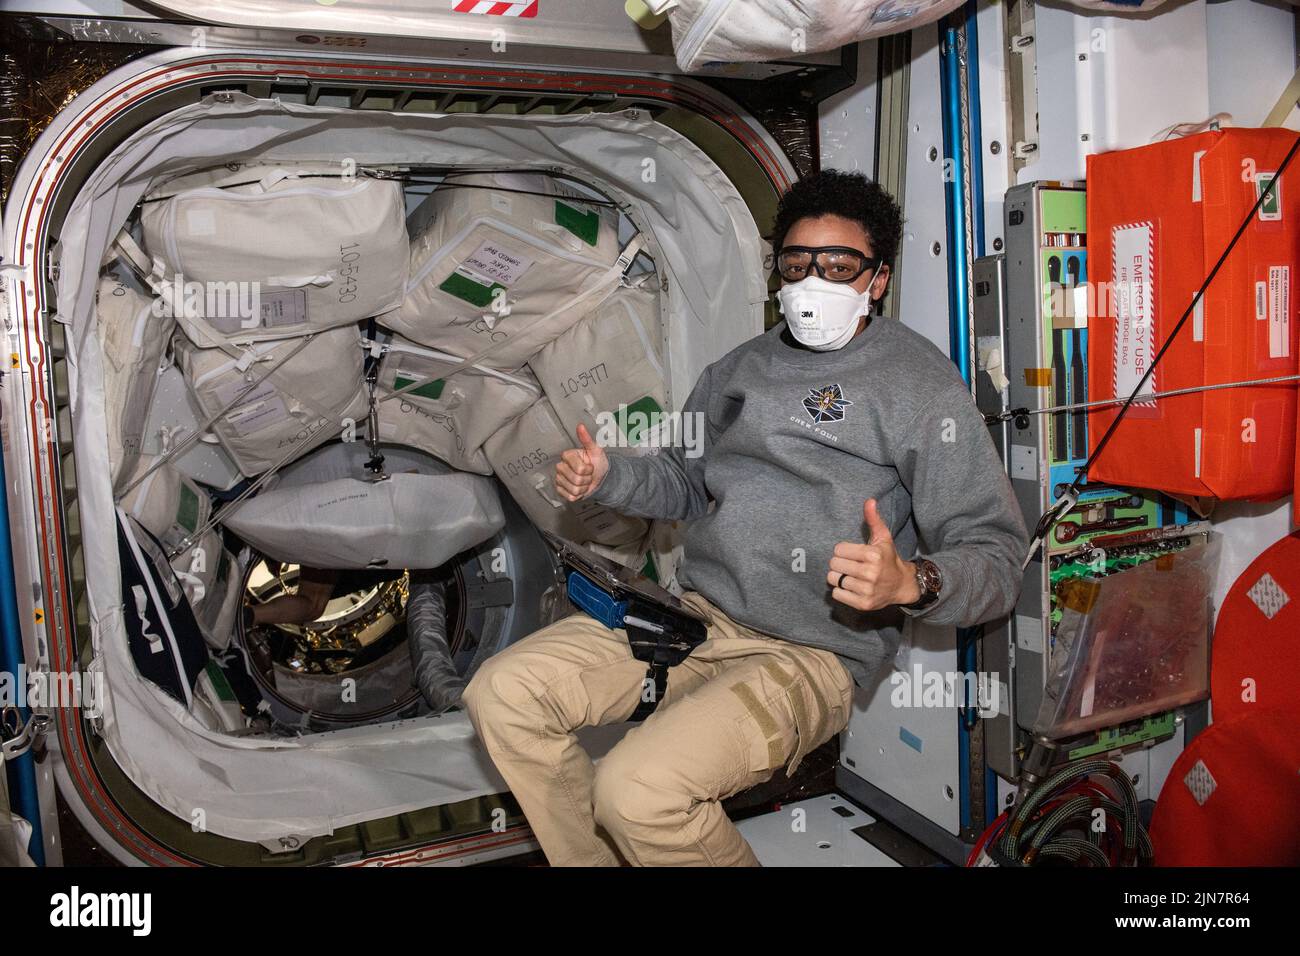 Earth Atmosphere. 16th July, 2022. Astronaut Jessica Watkins wears personal protective equipment as a precaution before entering the SpaceX Dragon resupply ship. Credit: NASA/ZUMA Press Wire Service/ZUMAPRESS.com/Alamy Live News Stock Photo